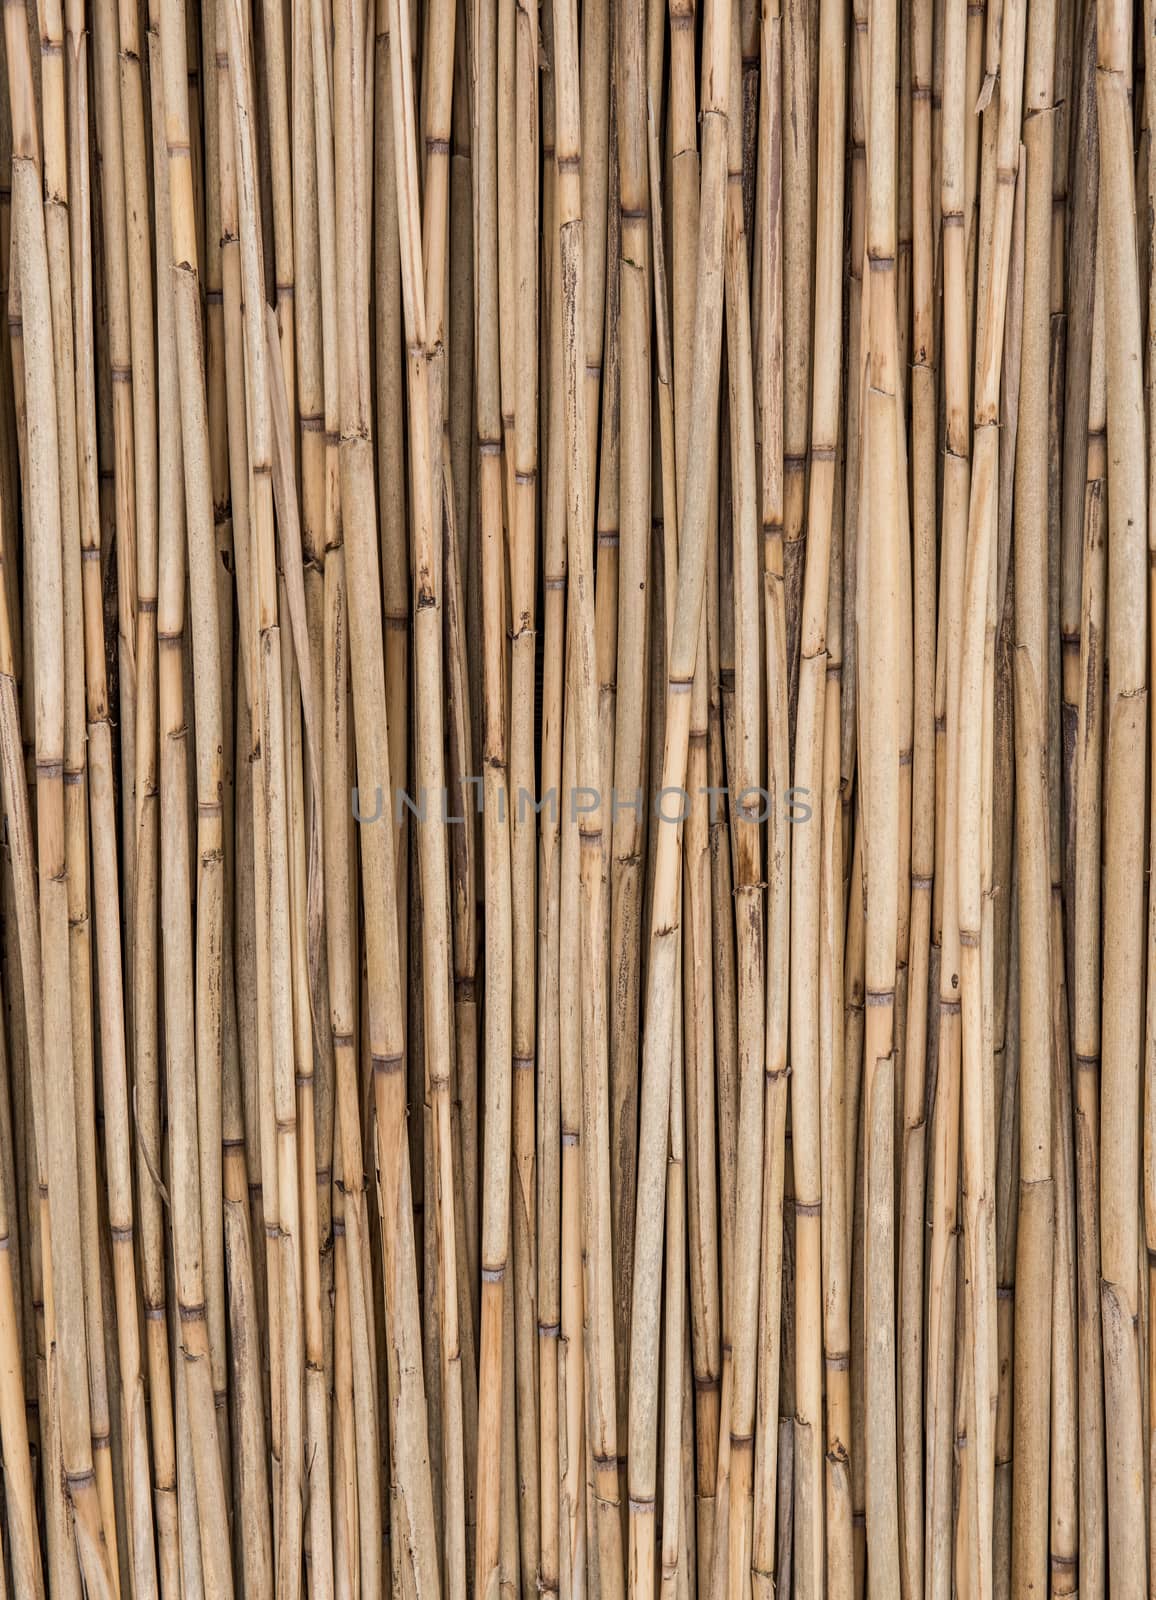 Old dry straw background, bamboo wall texture. Eco natural background concept